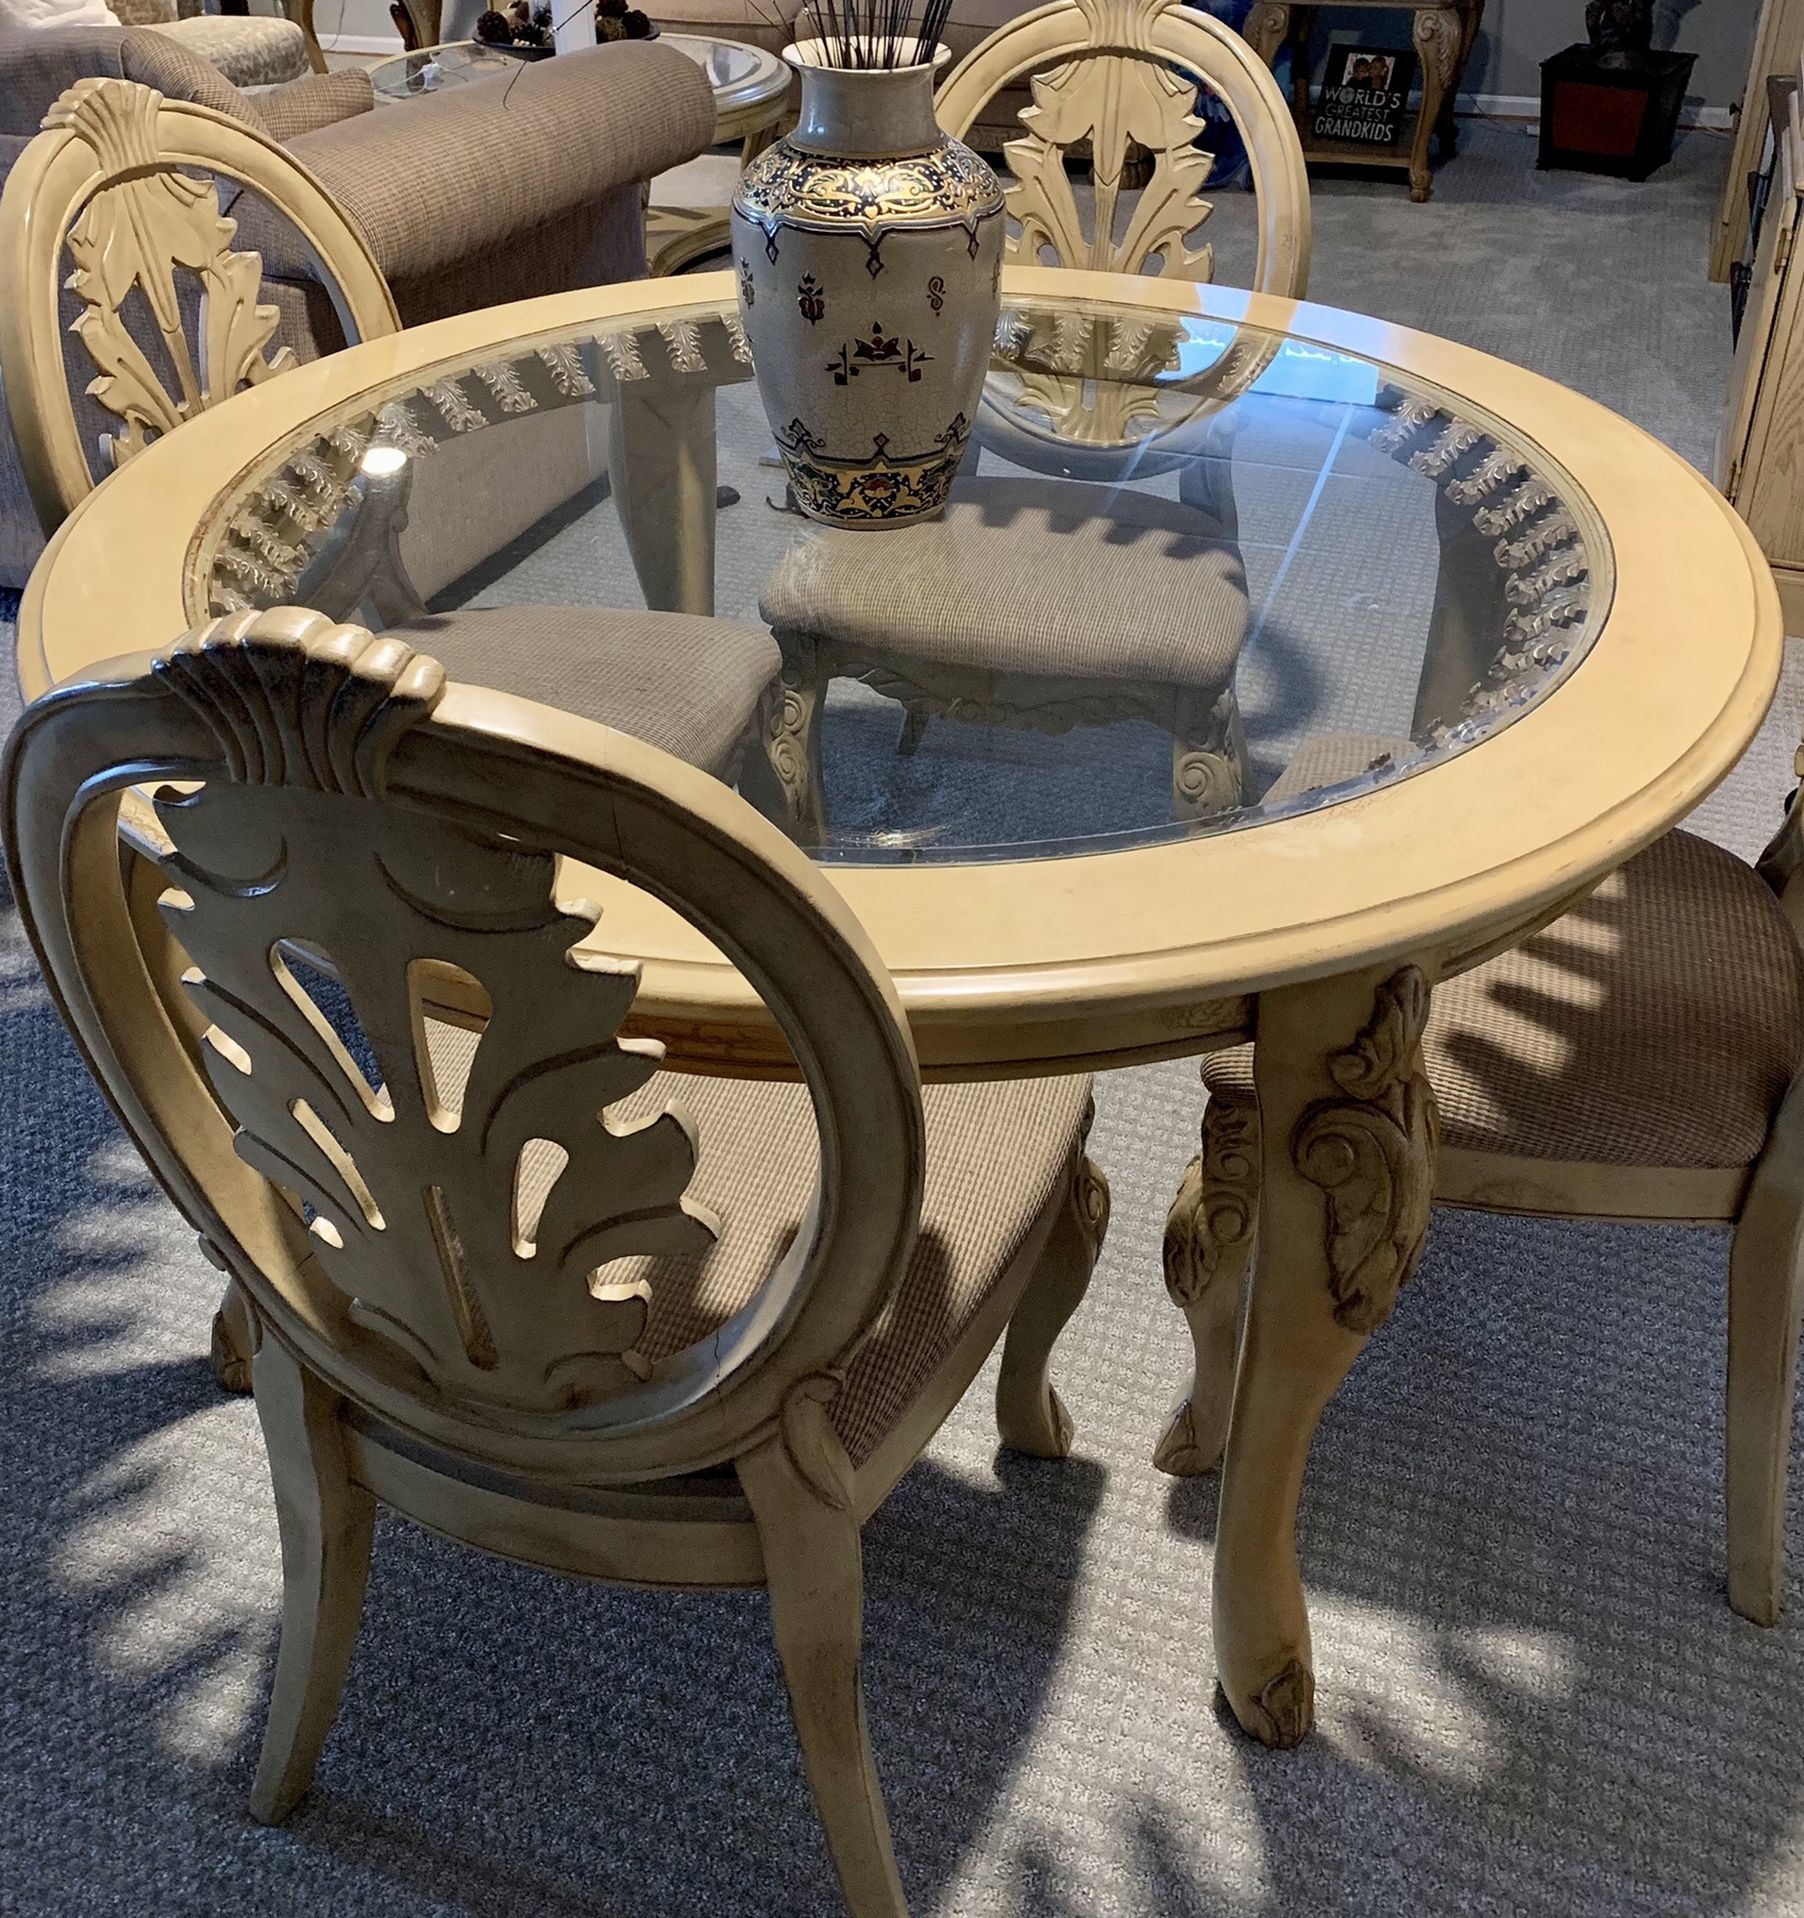 Round Table with 4 Chairs